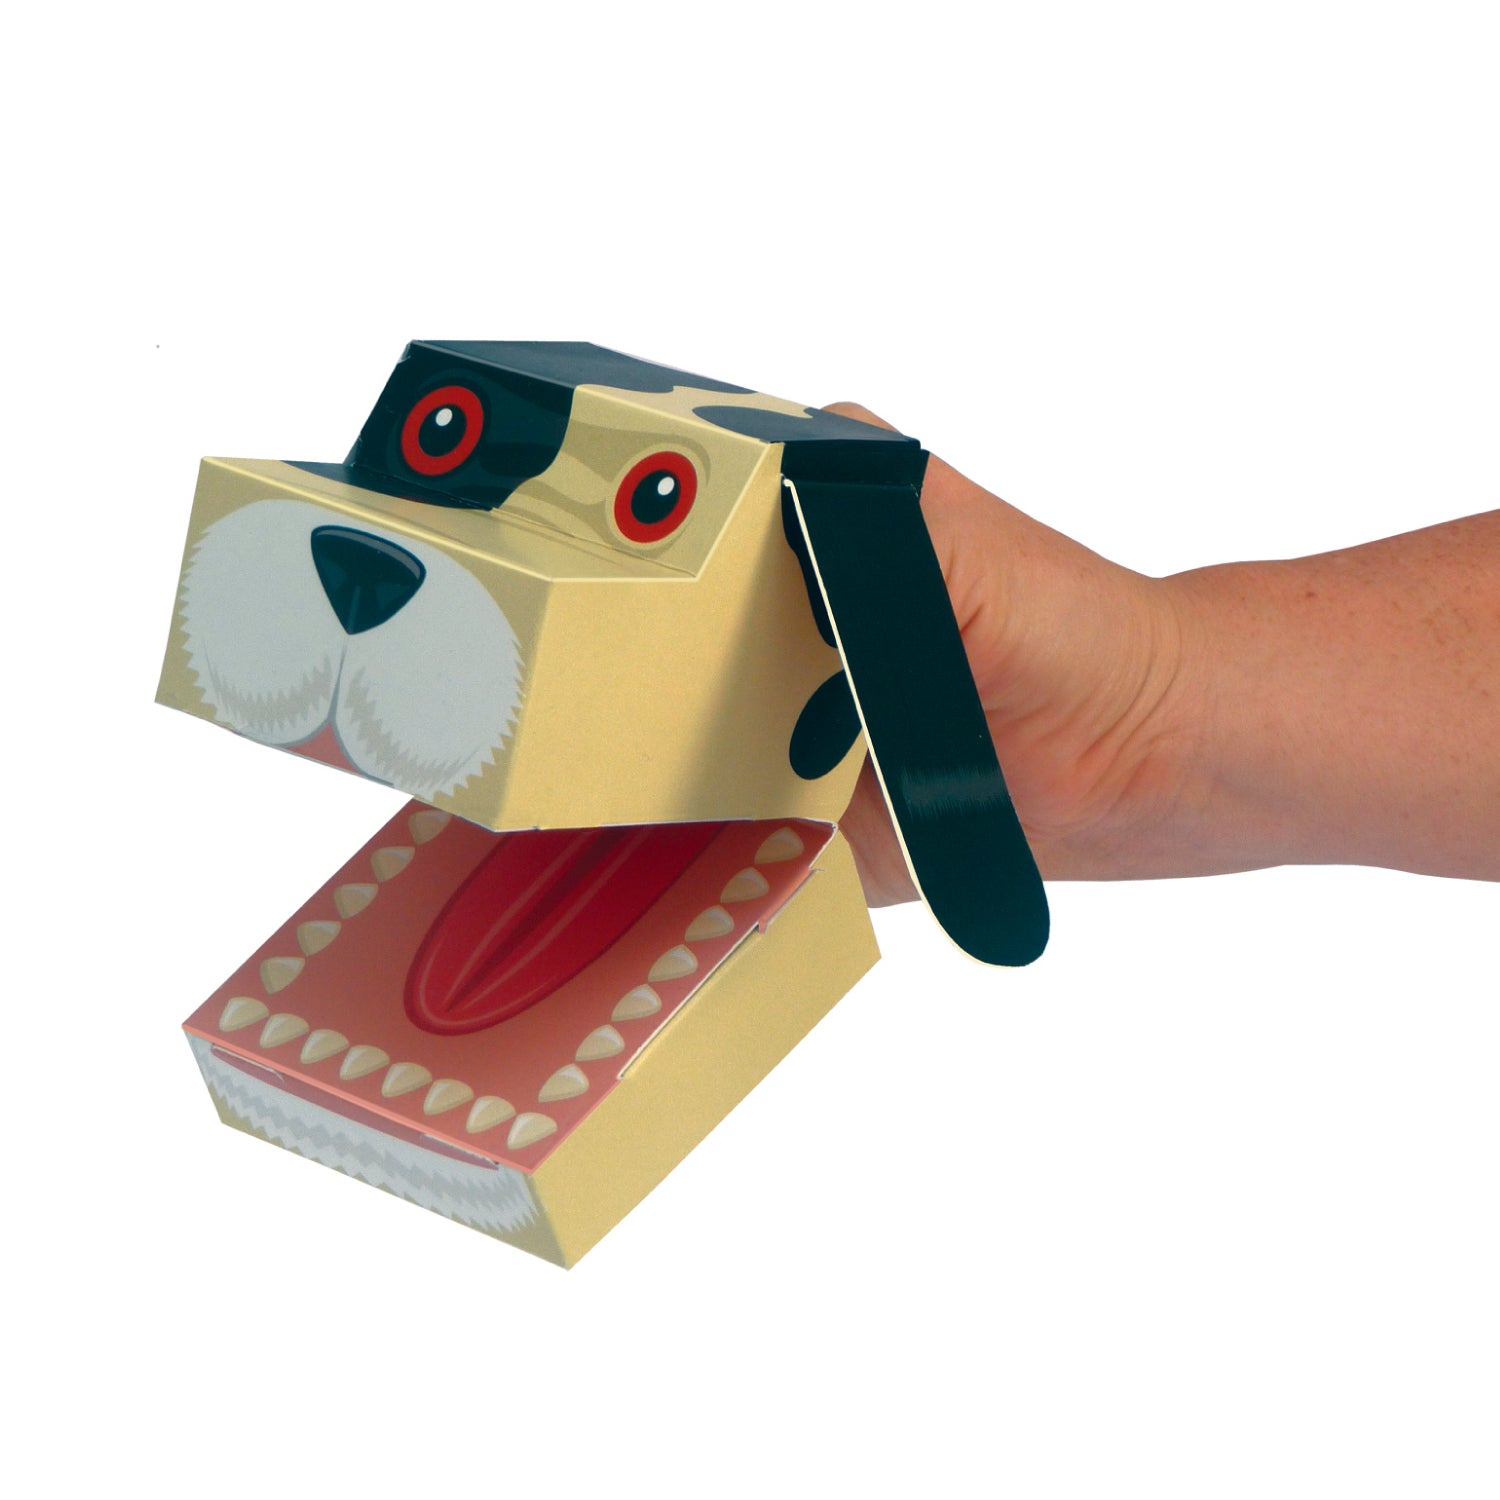 Create Your Own Little Pet Puppets